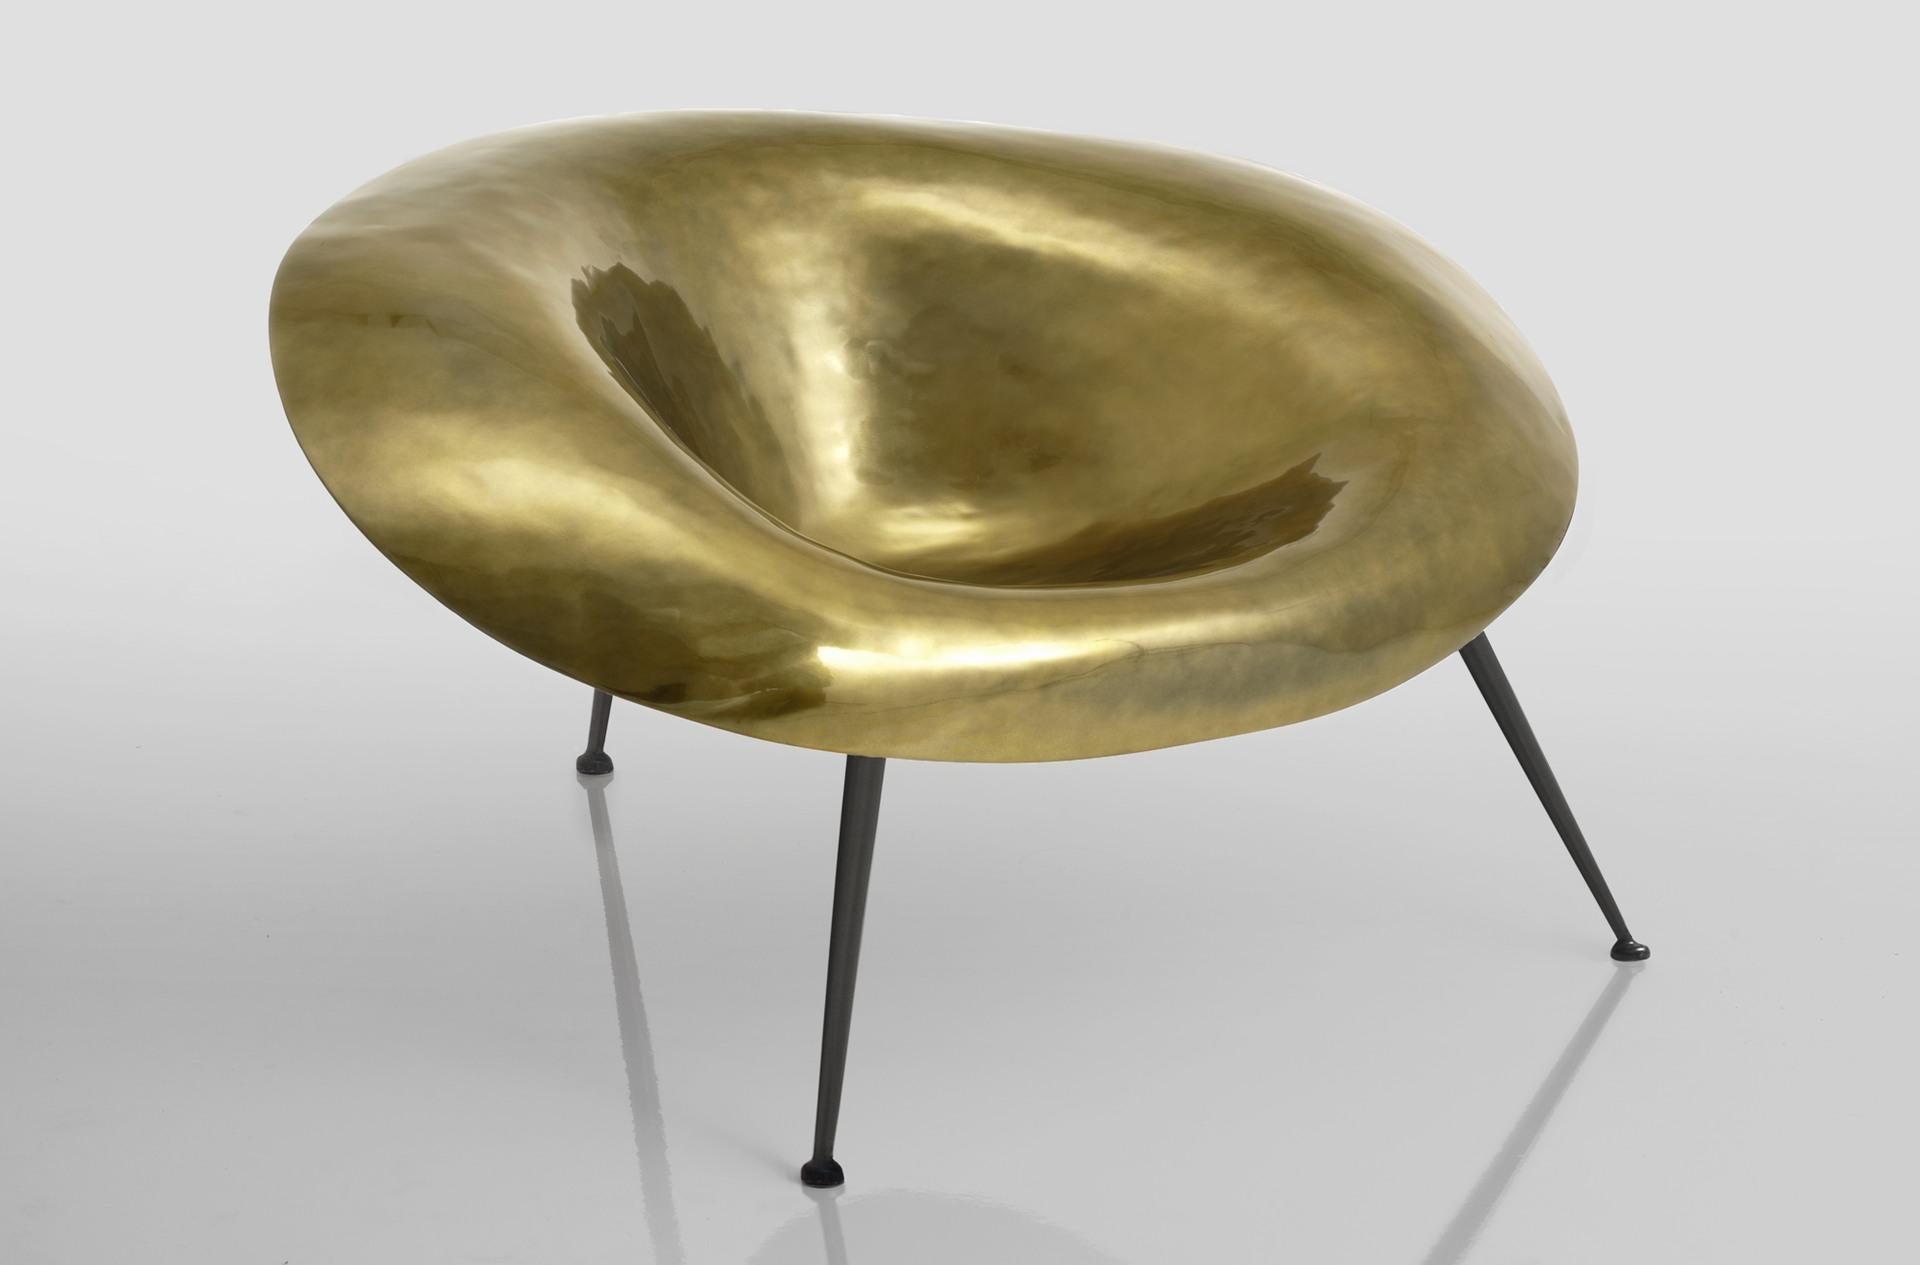 Pair of Gold Nido by Imperfettolab
2008
Dimensions: W 130 x D 97 x H 66 cm 
Materials: Varnished fibreglass, metal base
 Gold finish

Imperfetto lab
Who we are ? We are a family.
Verter Turroni, Emanuela Ravelli and our children Elia, Margherita and